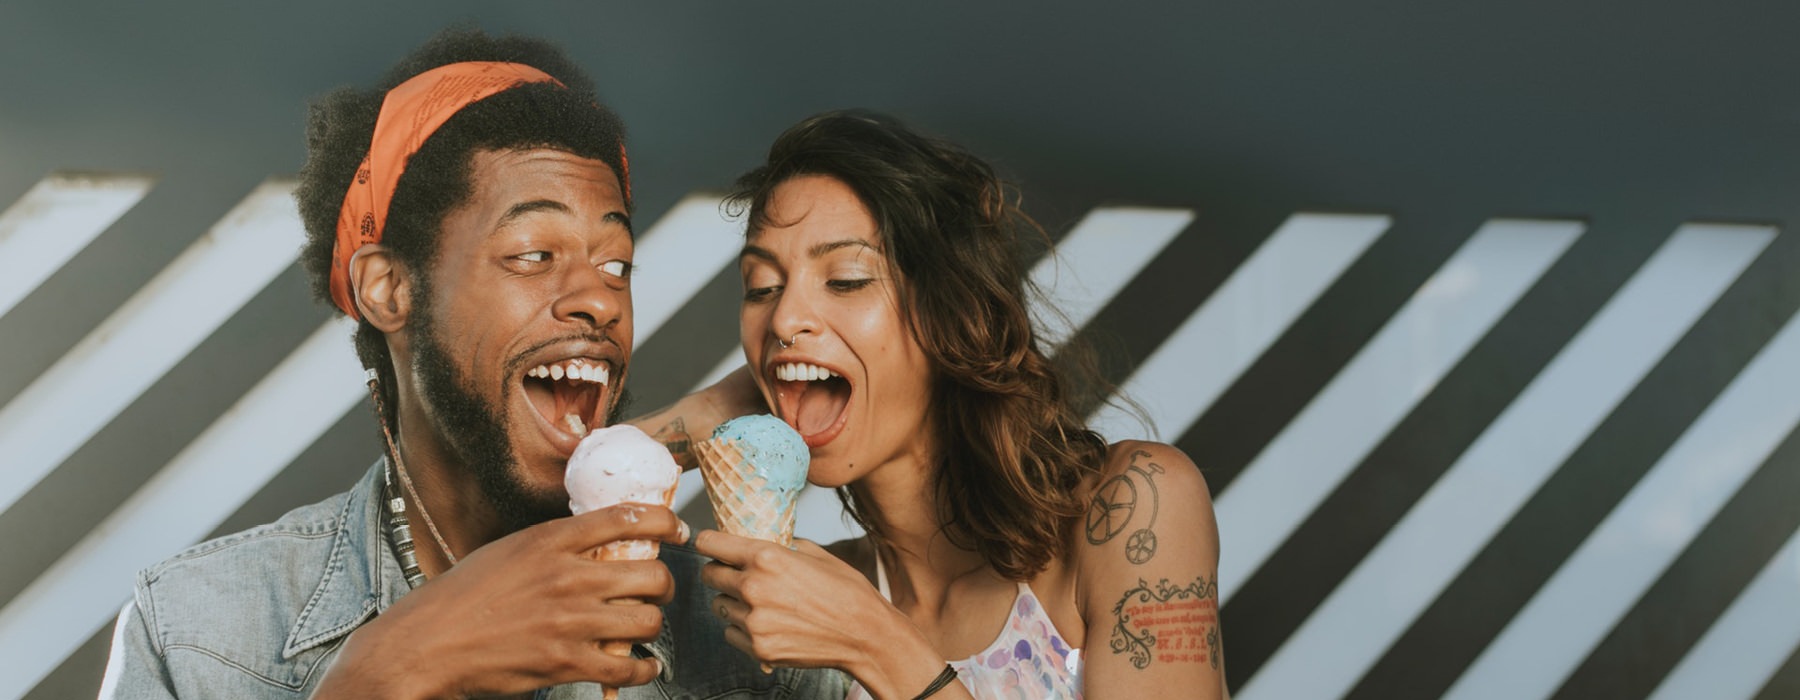 A guy and girl eat ice cream